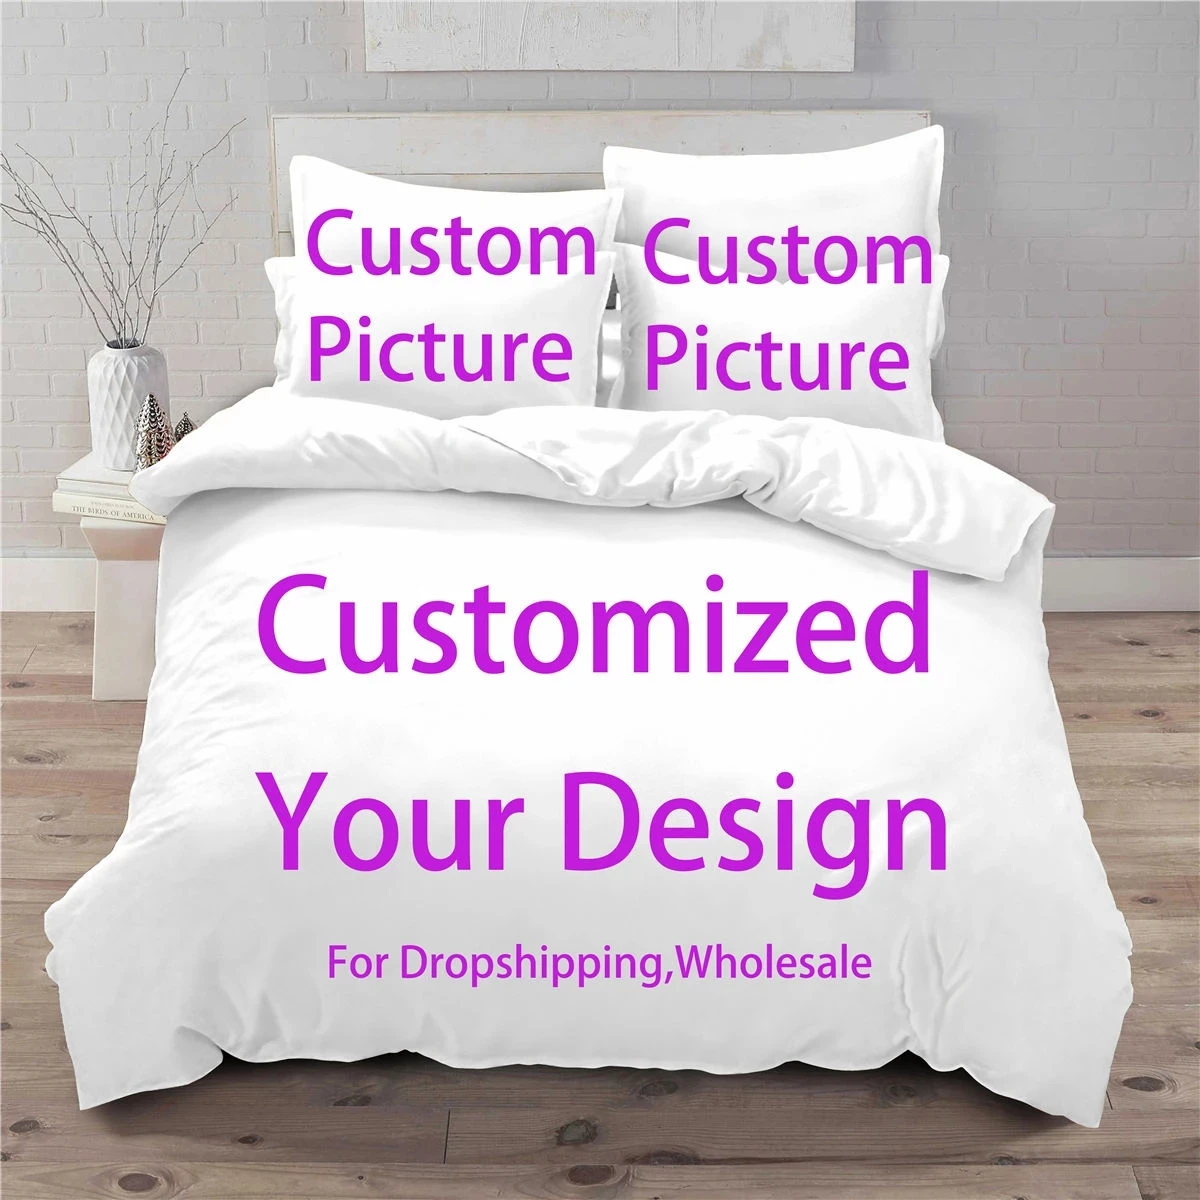 

3d Custom Image Bedding Set Customized 2/3pc Printed Duvet Cover Sets with Pillowcase Twin Full Queen King Size Home Textiles